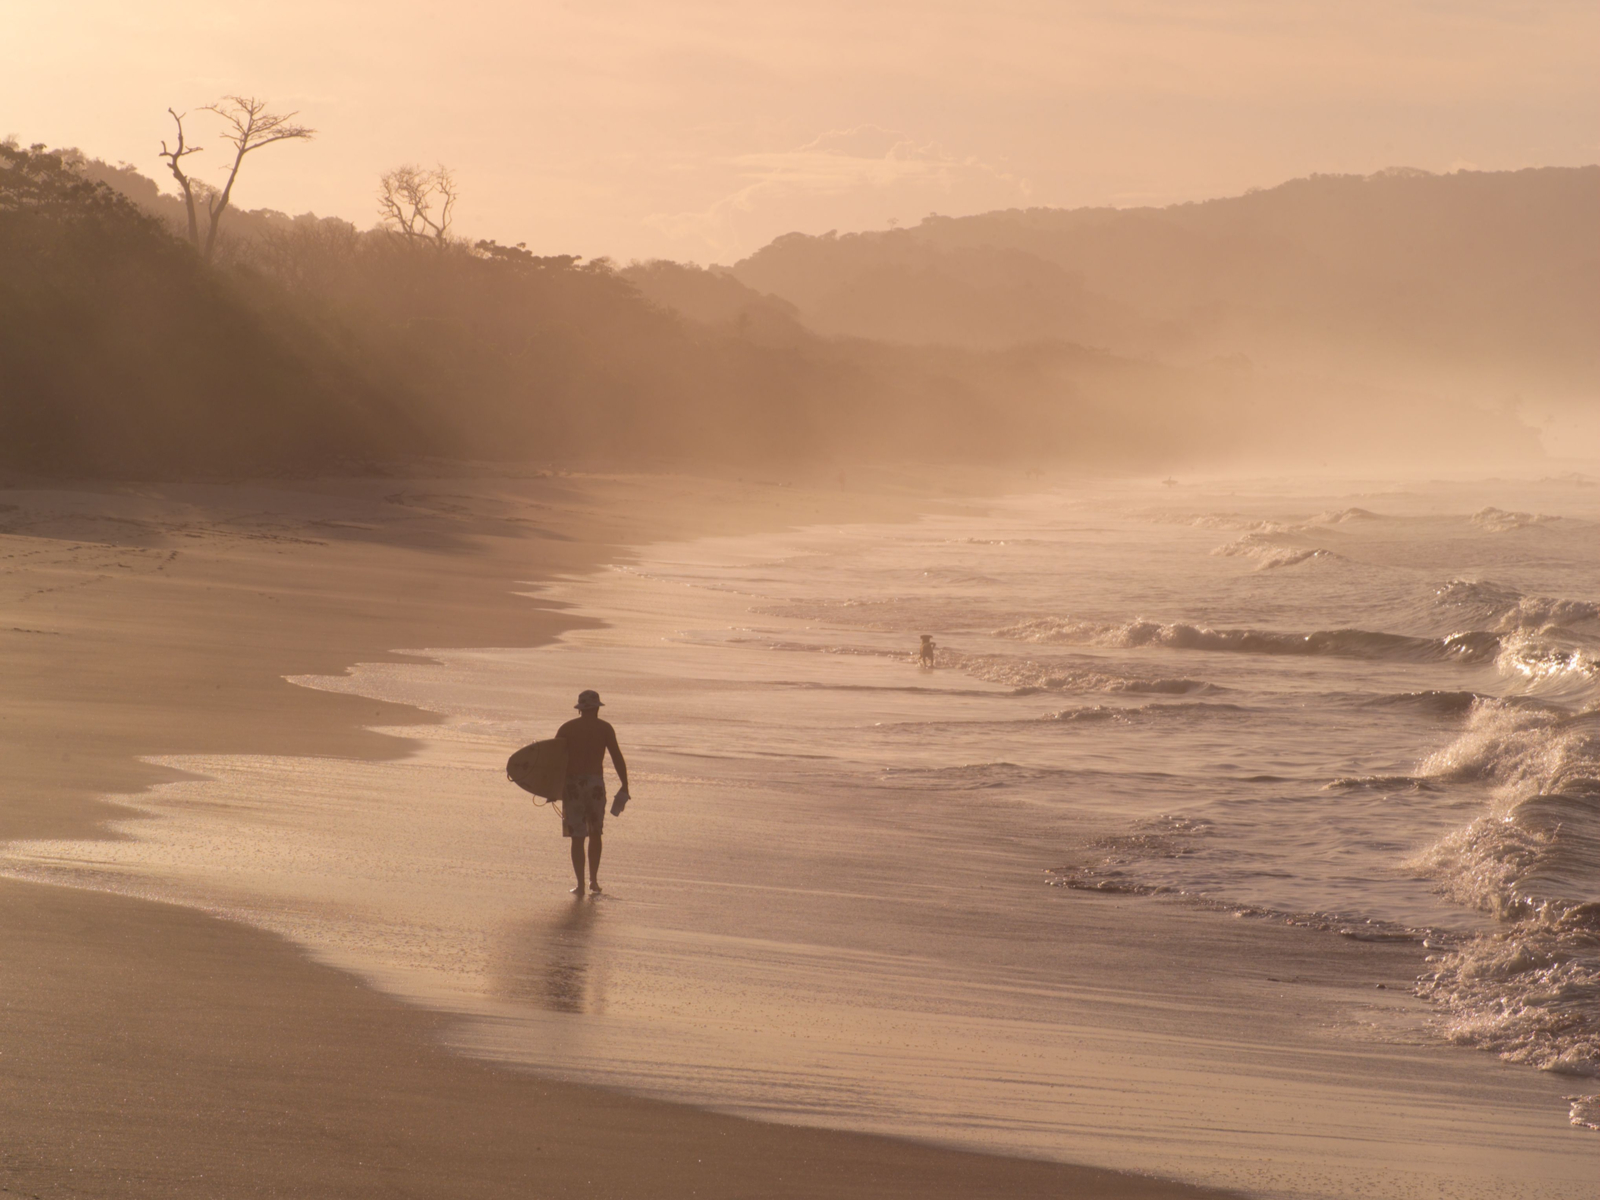 Unique of a surfer walking in one of Costa Rica's best places to visit, Malpais, on a misty day